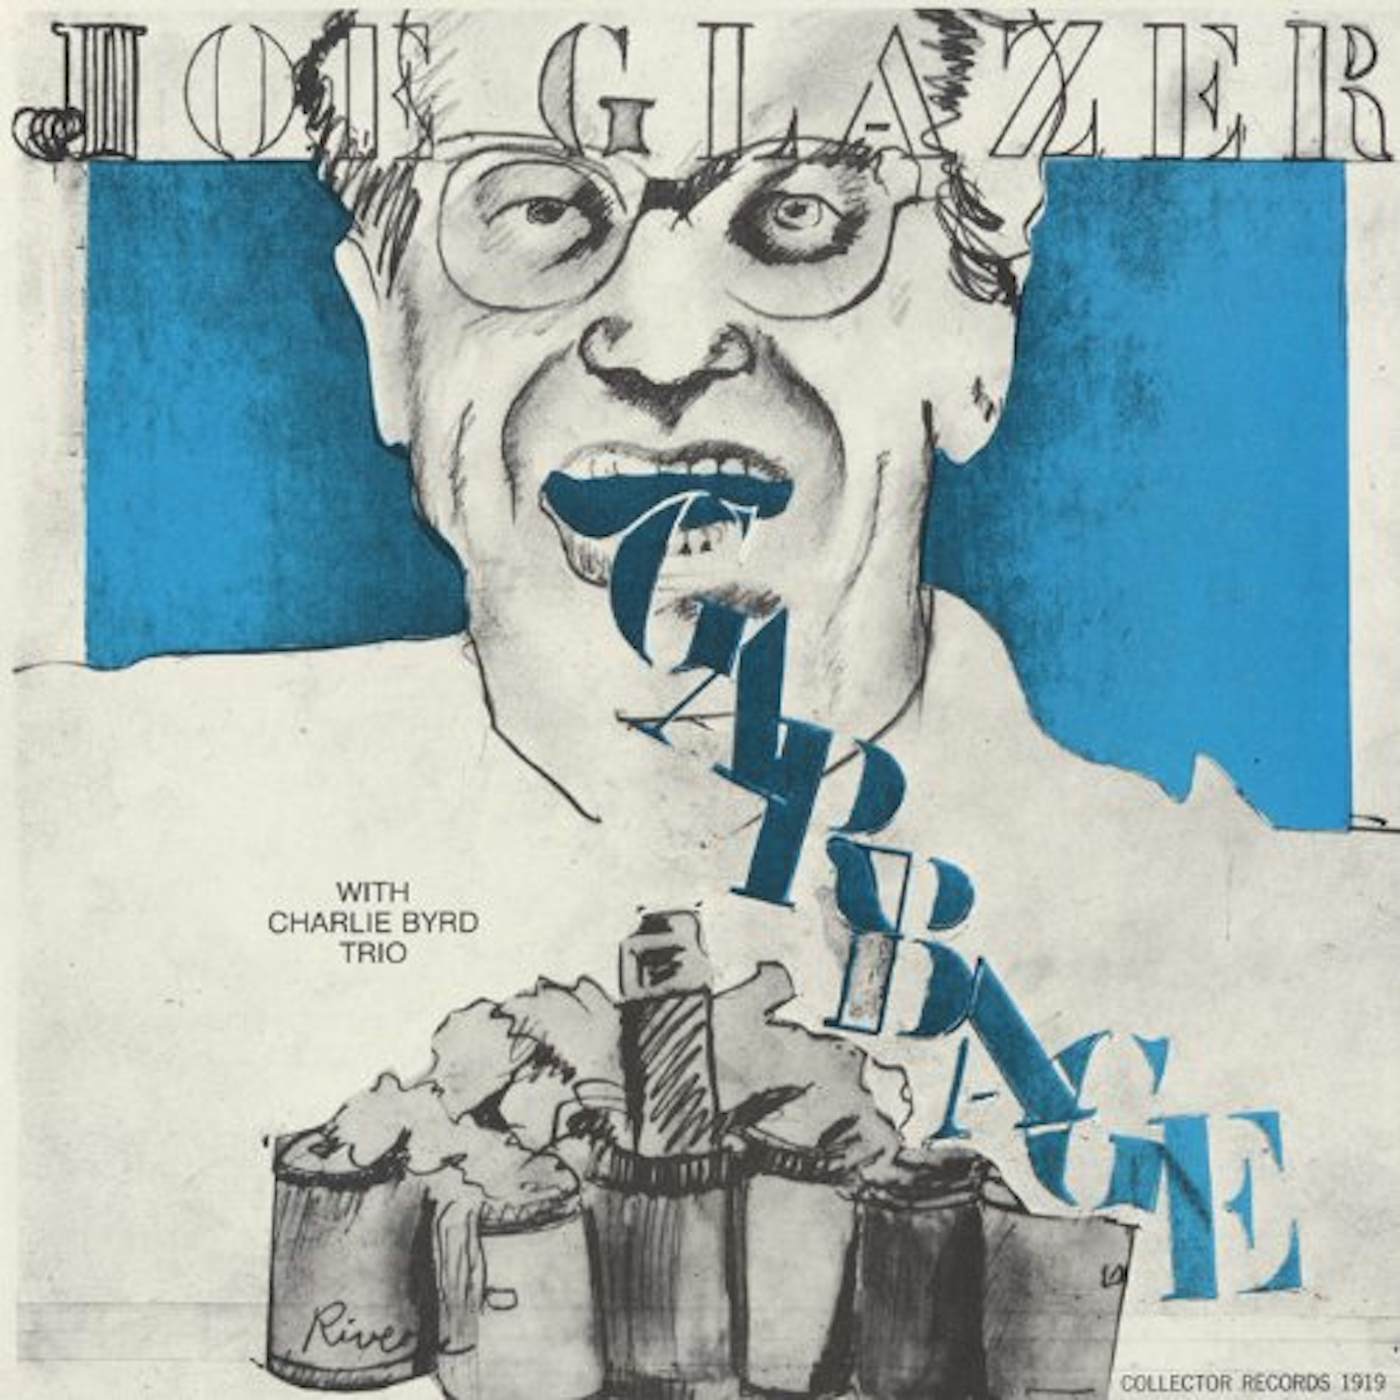 Joe Glazer Garbage and Other Songs of Our Time Vinyl Record